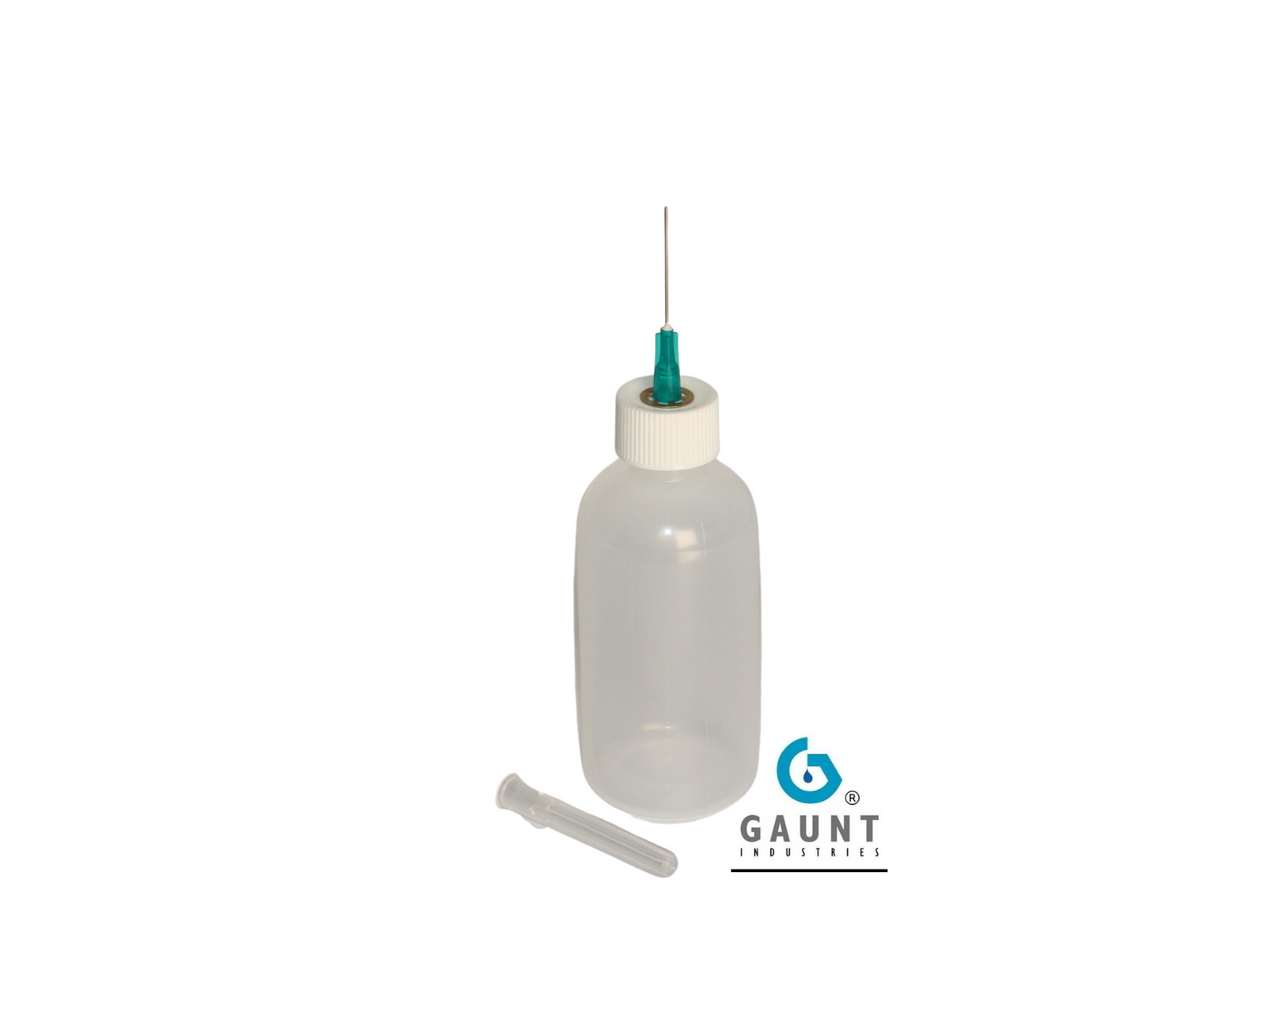 Gaunt Industries HYPO-25 - Epoxy & Cement Applicator - Precision Acrylic Adhesive Dispenser - 2 Ounce Clear Plastic Bottle with 23 Gauge Blunt Tip